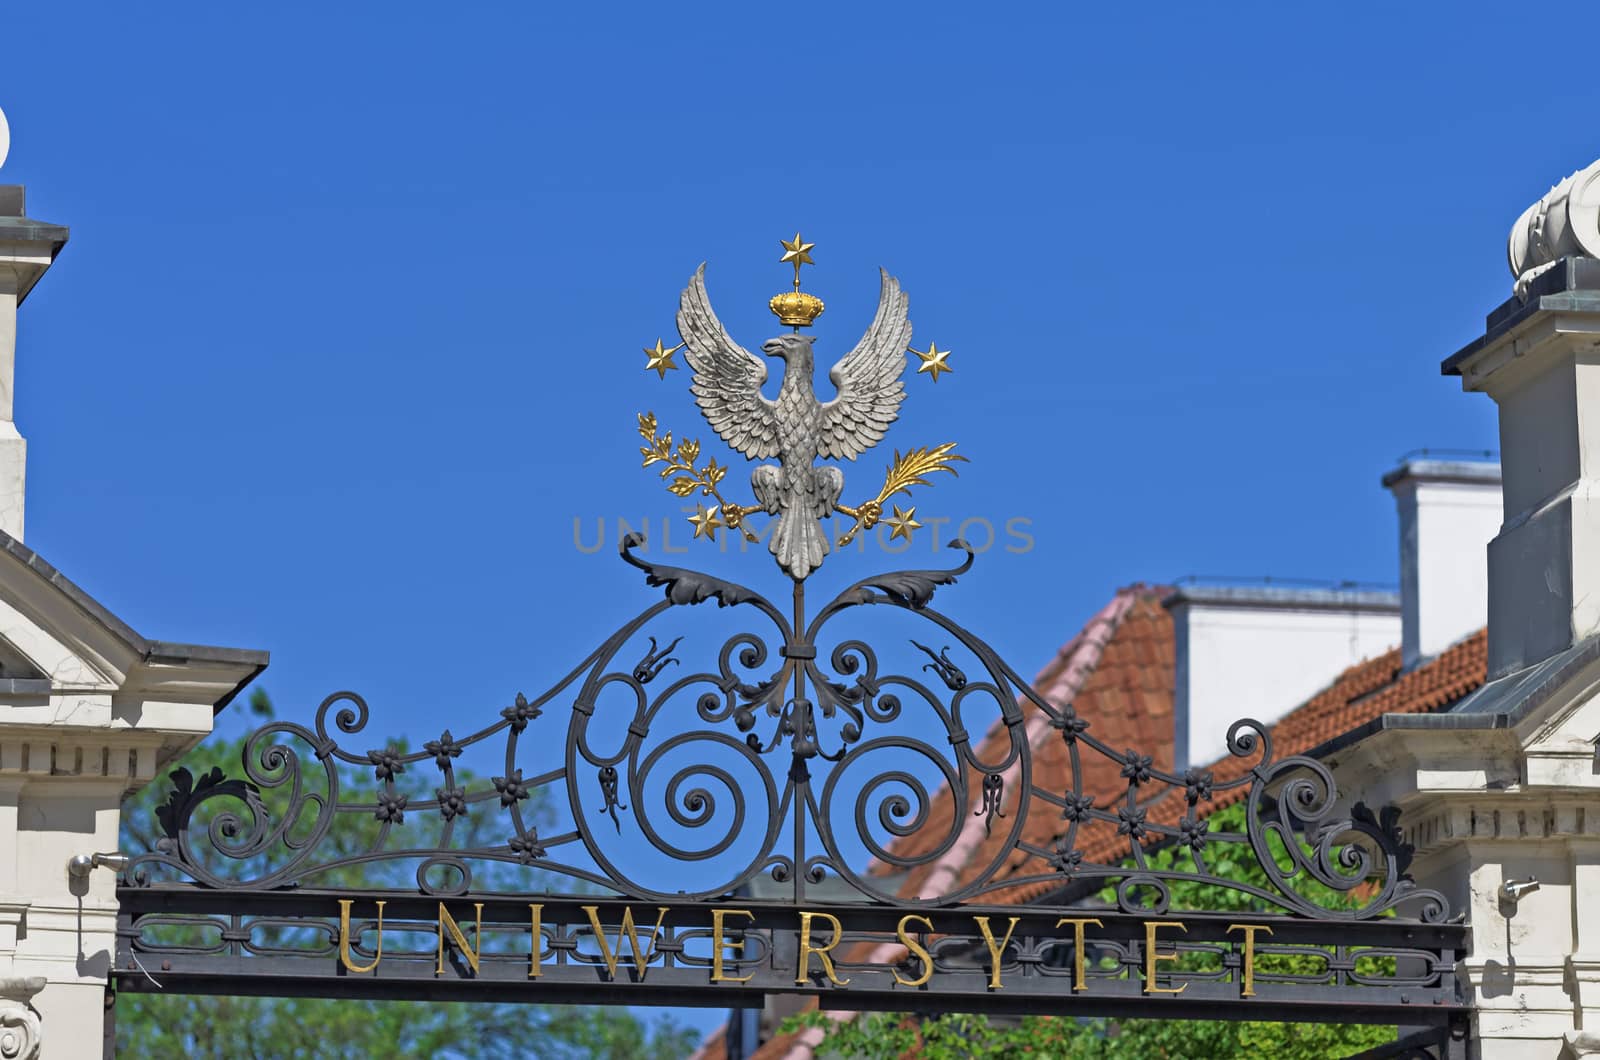 Silver crowned eagle above  the old iron gate - by Stefan Szyller, 1911 - with laurel and palm leaves in its claws. The eagle is surrounded by five golden stars, which correspond to the number of faculties at the time of the University’s creation, Warsaw University, Poland.